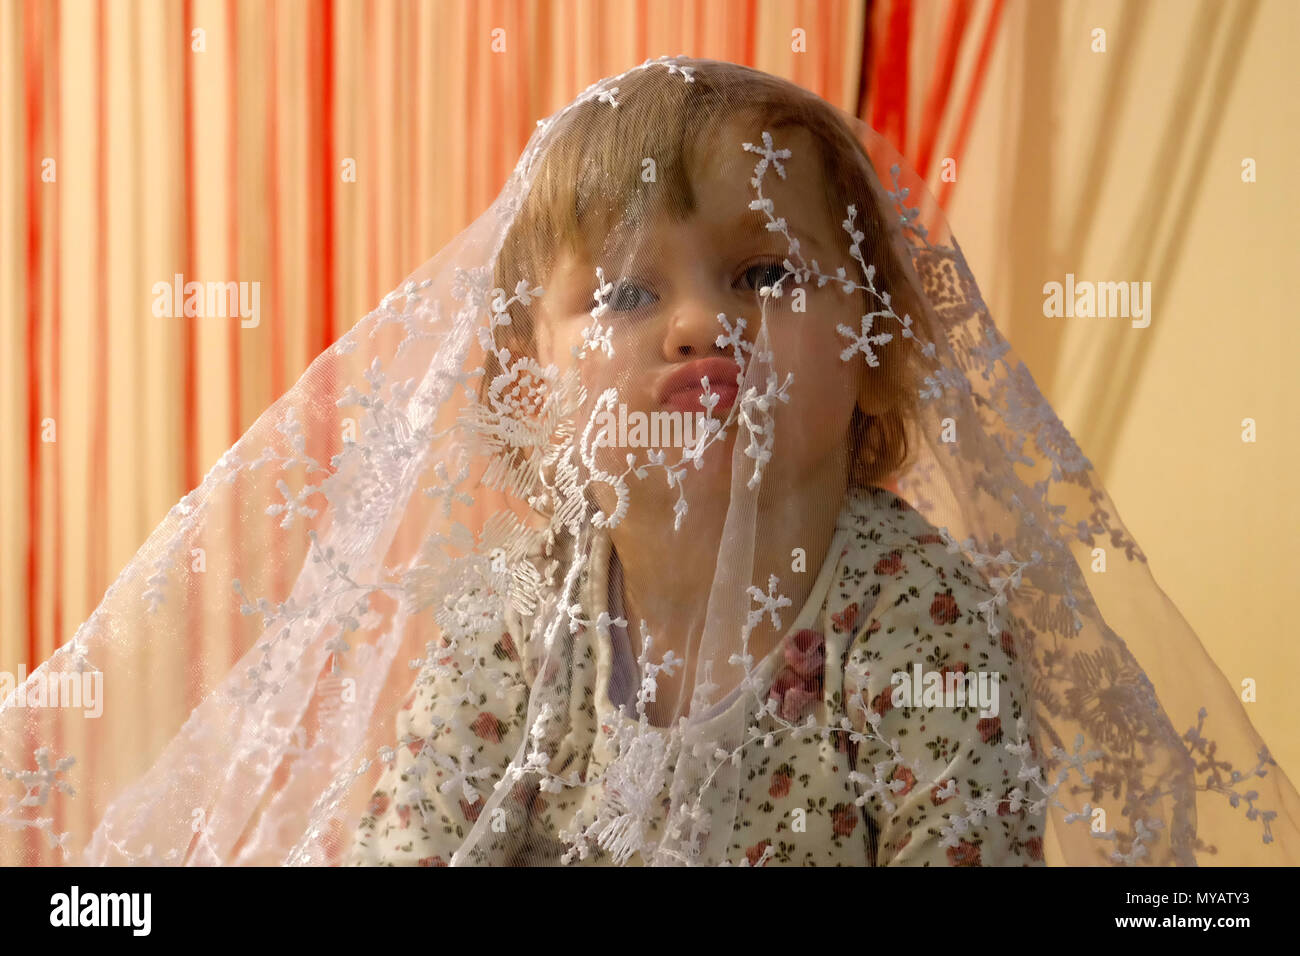 Little girl put out her lips for a kiss, covered with a veil Stock Photo